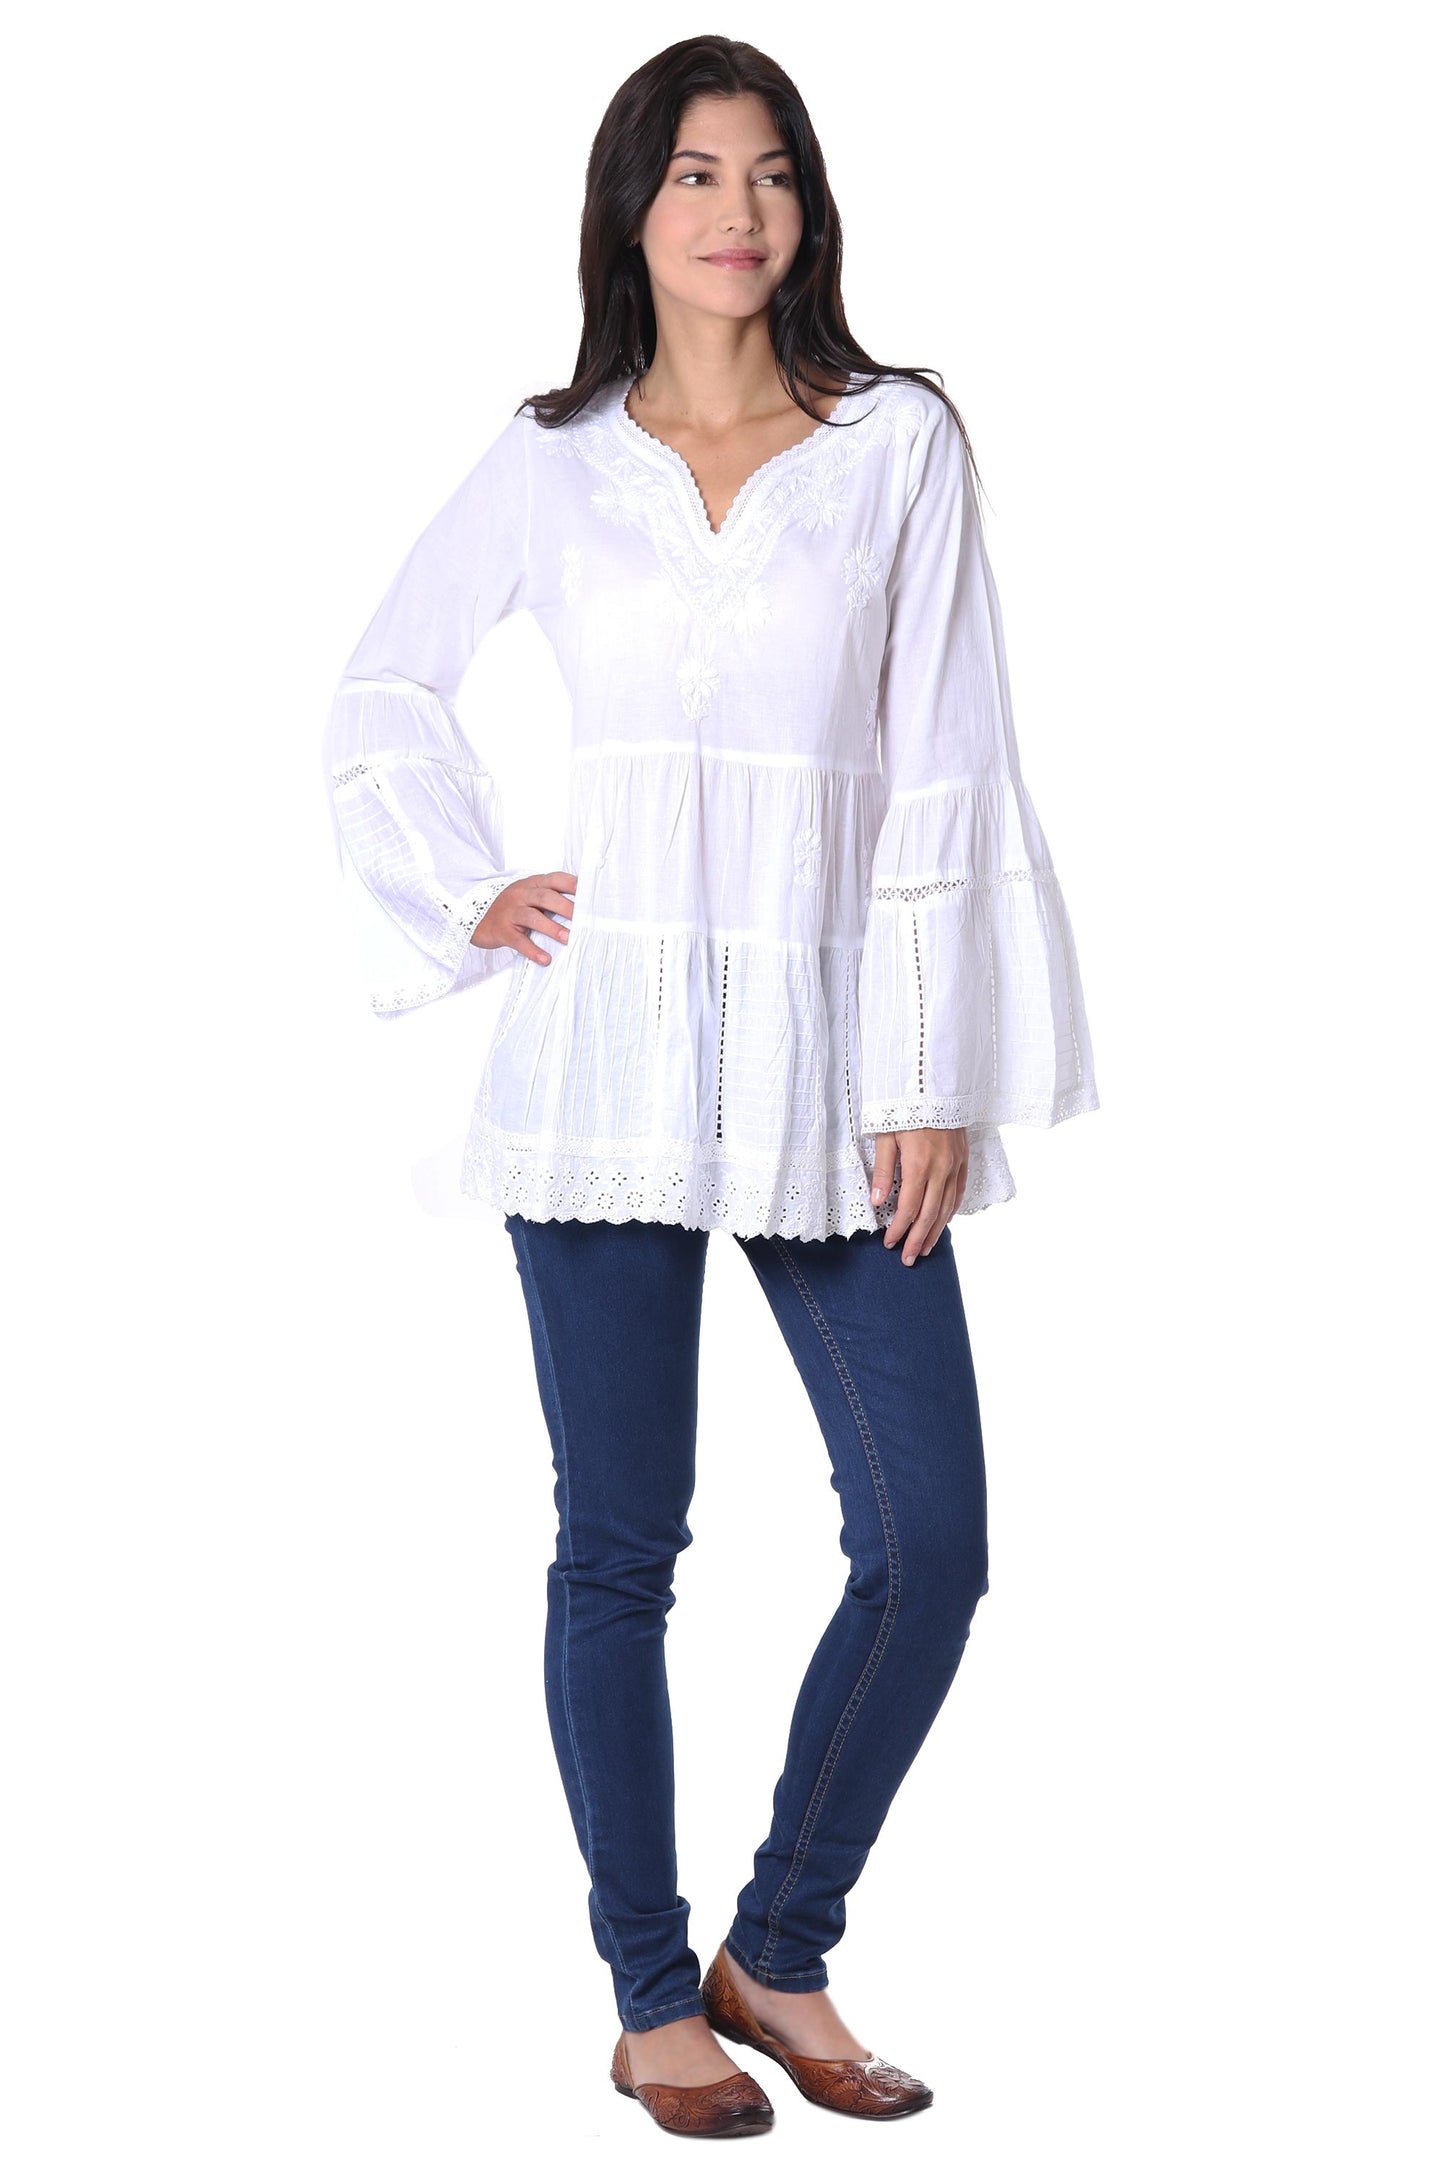 Floral White Floral Embroidered White Cotton Blouse from India